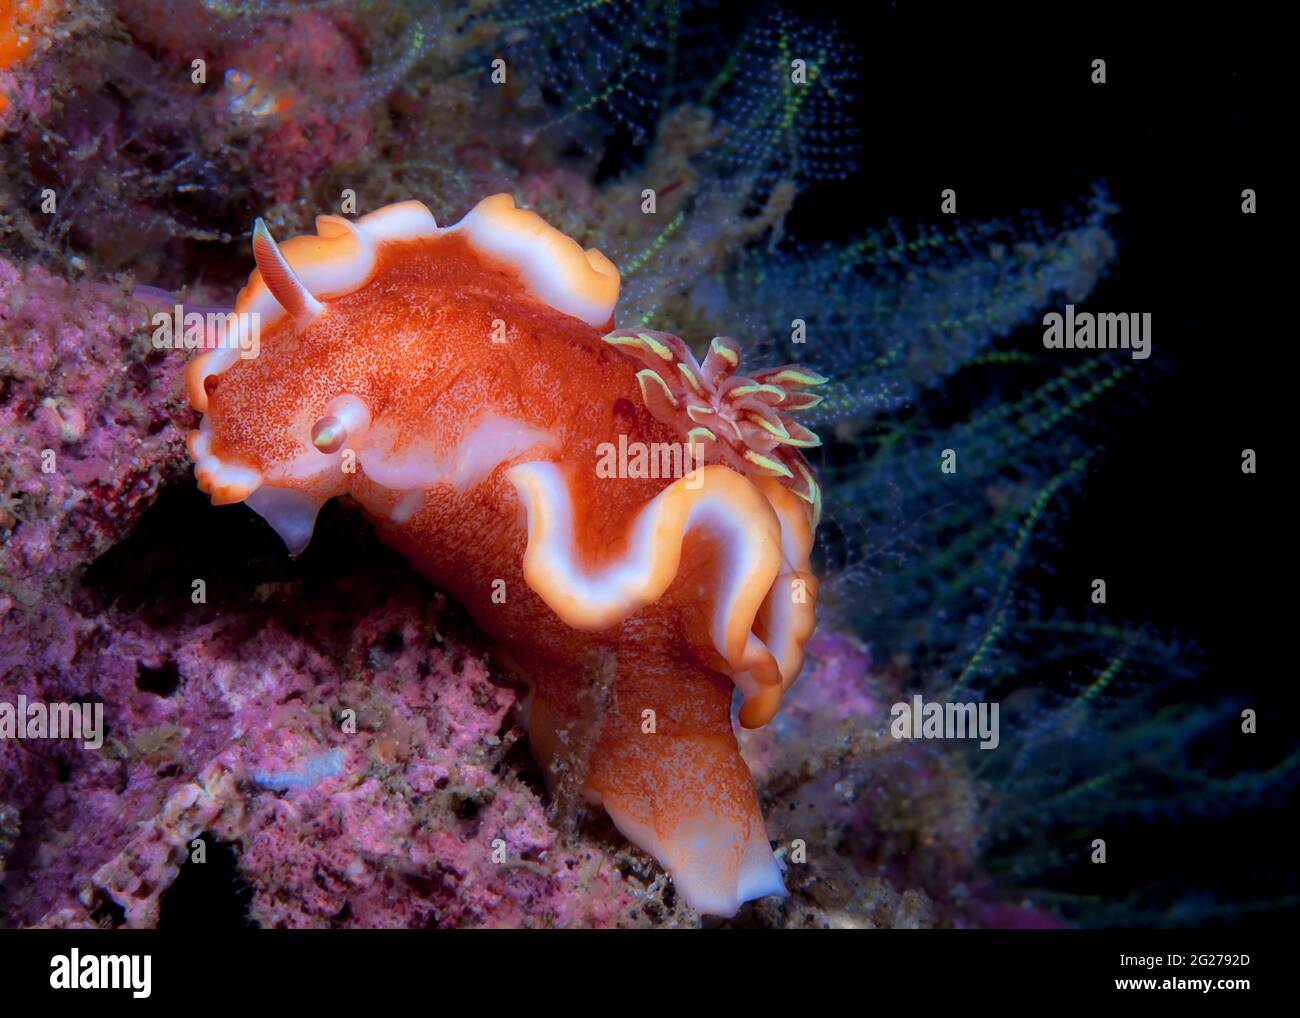 Nudibranch hunting for food, Lembeh Strait, Indonesia. Stock Photo